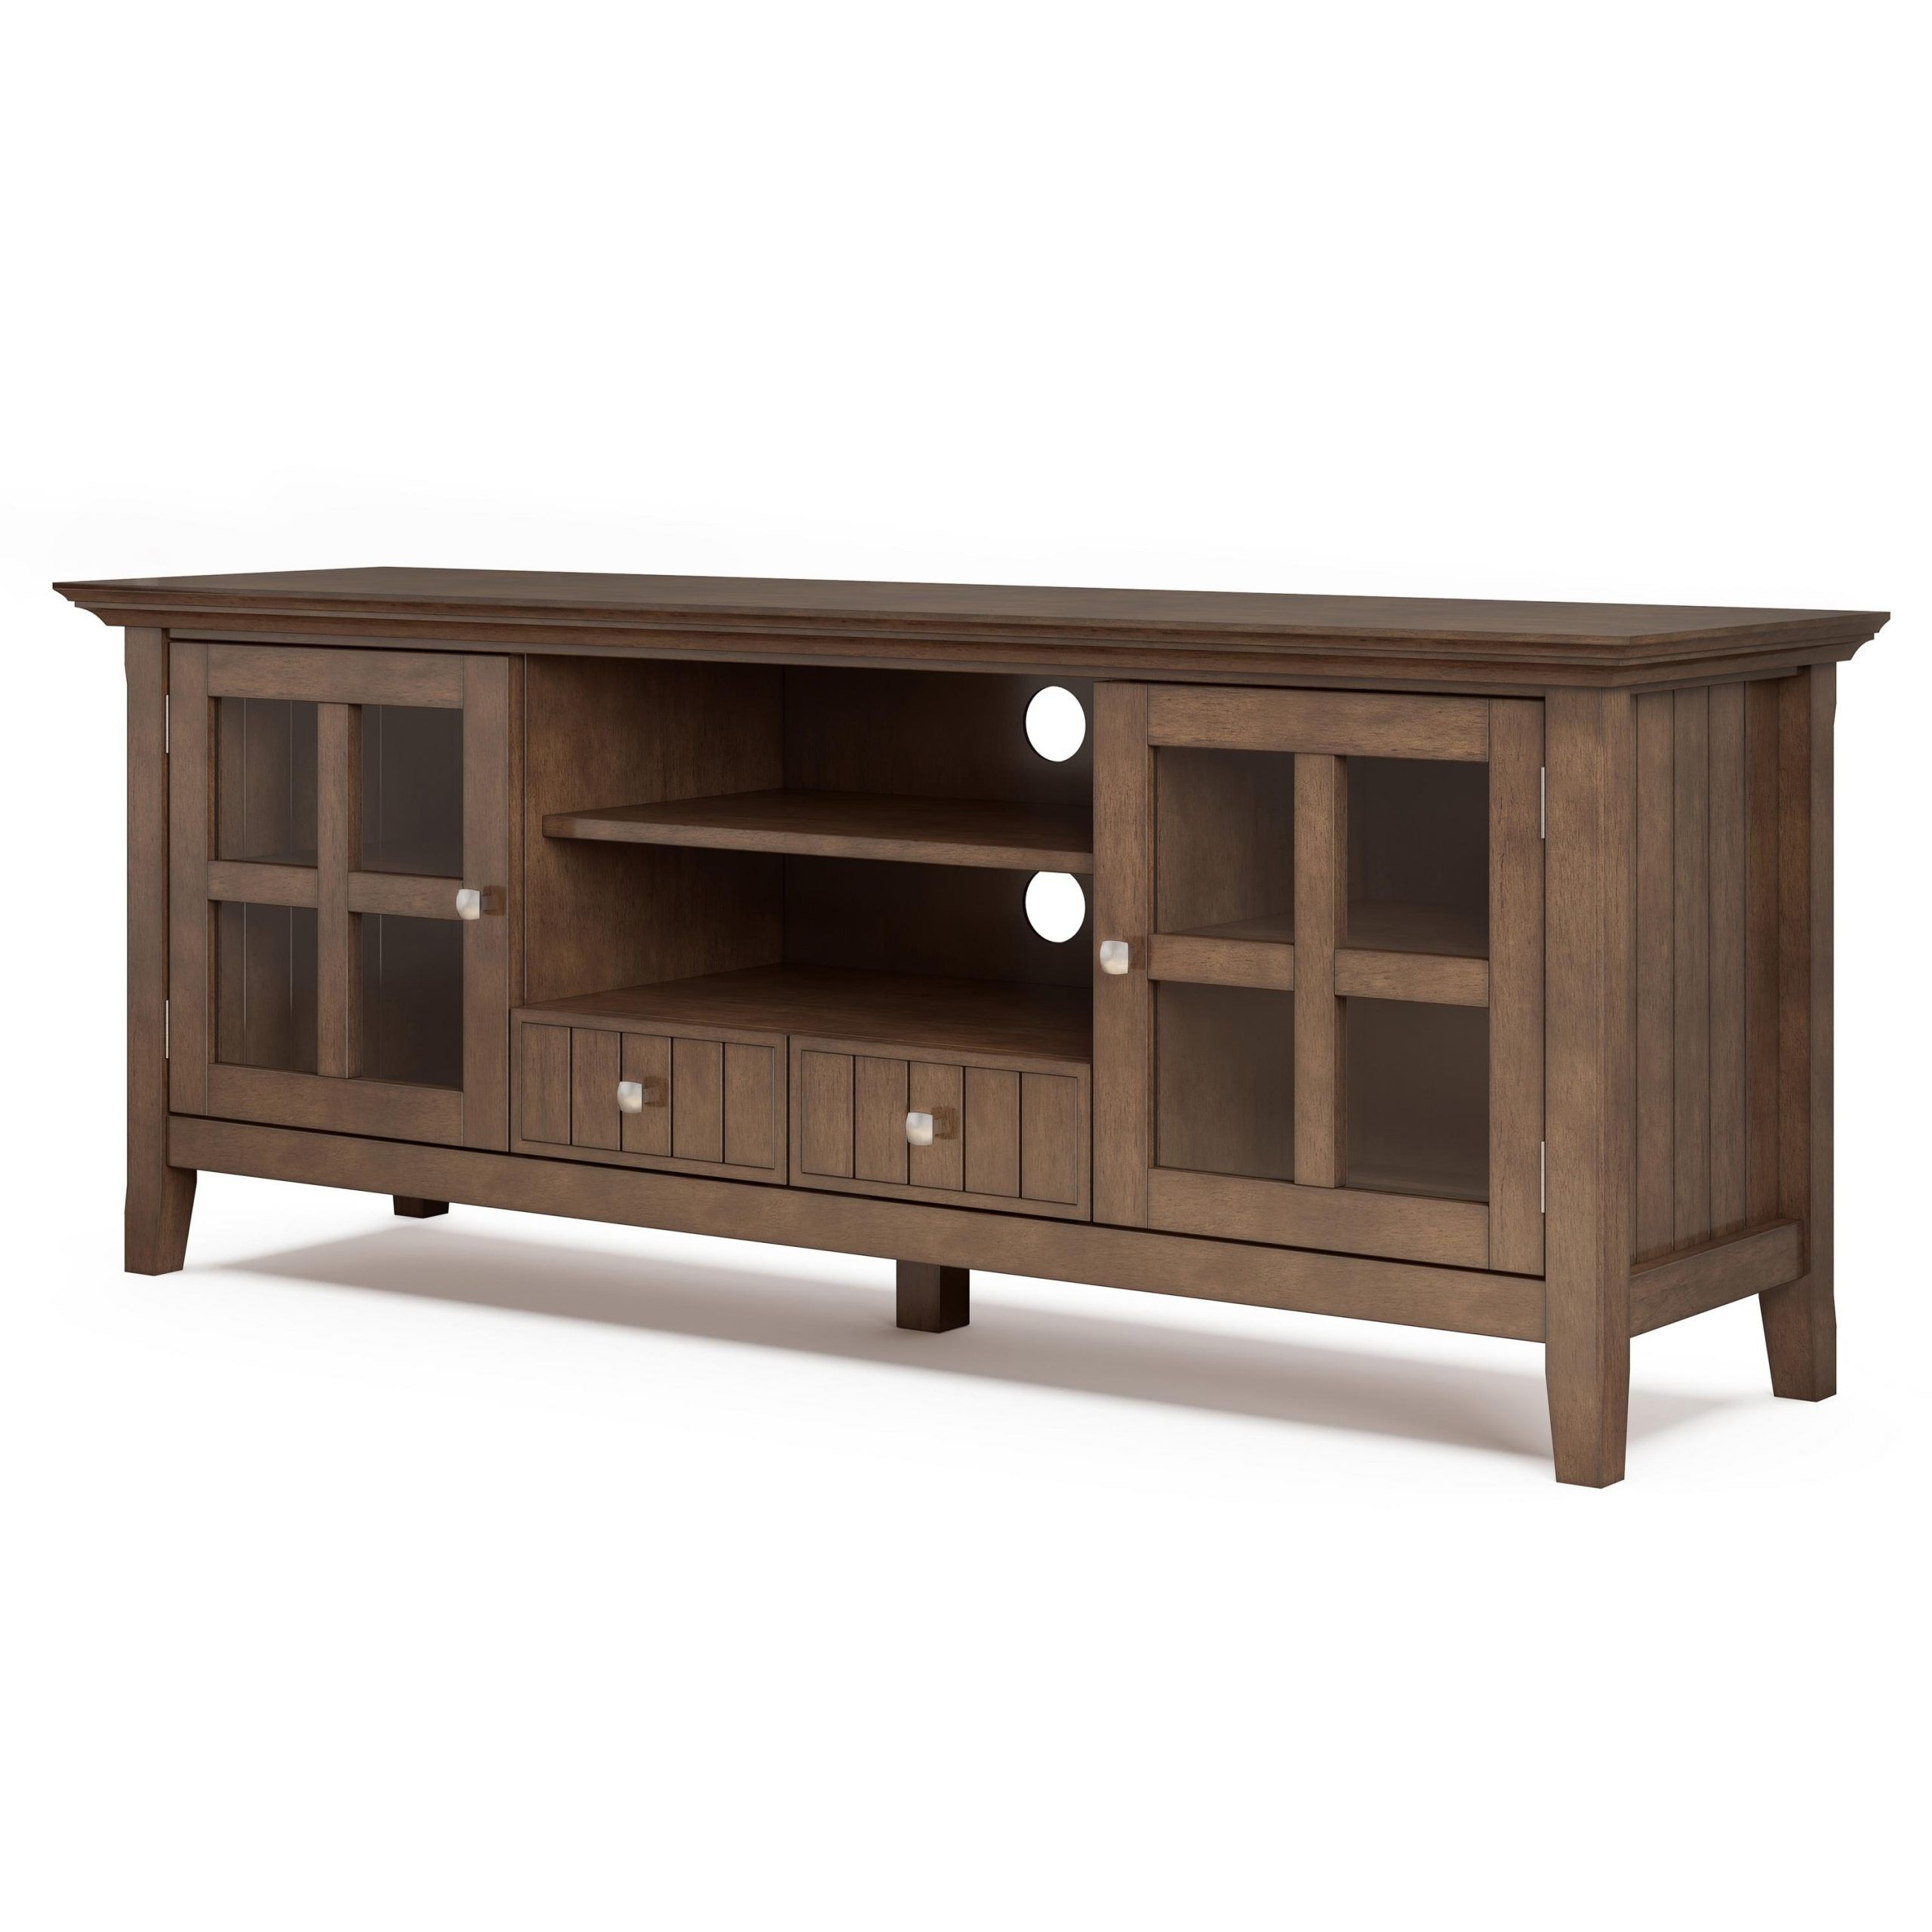 Simpli Home Acadian Solid Wood 60 Inch Wide Rustic Tv For Tribeca Oak Tv Media Stand (View 5 of 20)